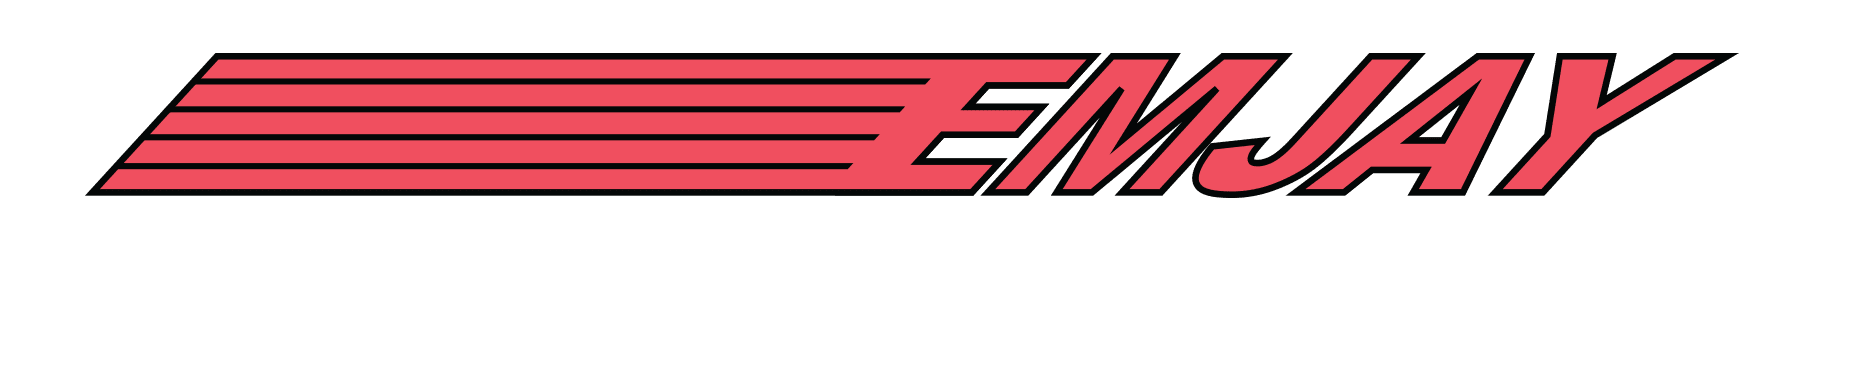 Emjay Sales and Leasing